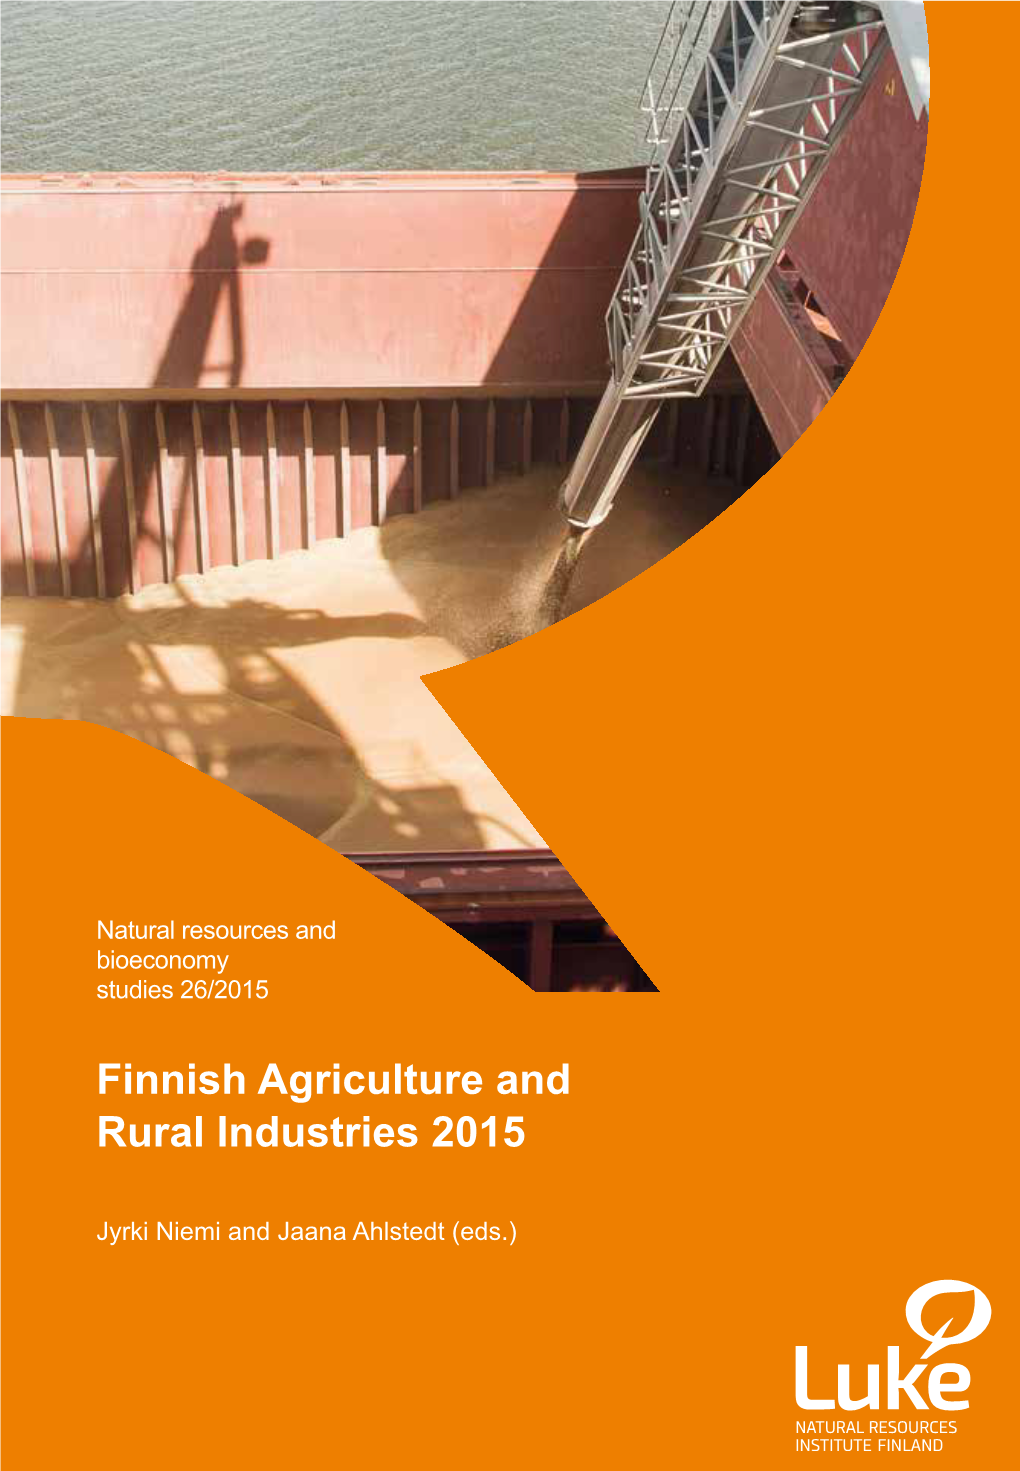 Finnish Agriculture and Rural Industries 2015